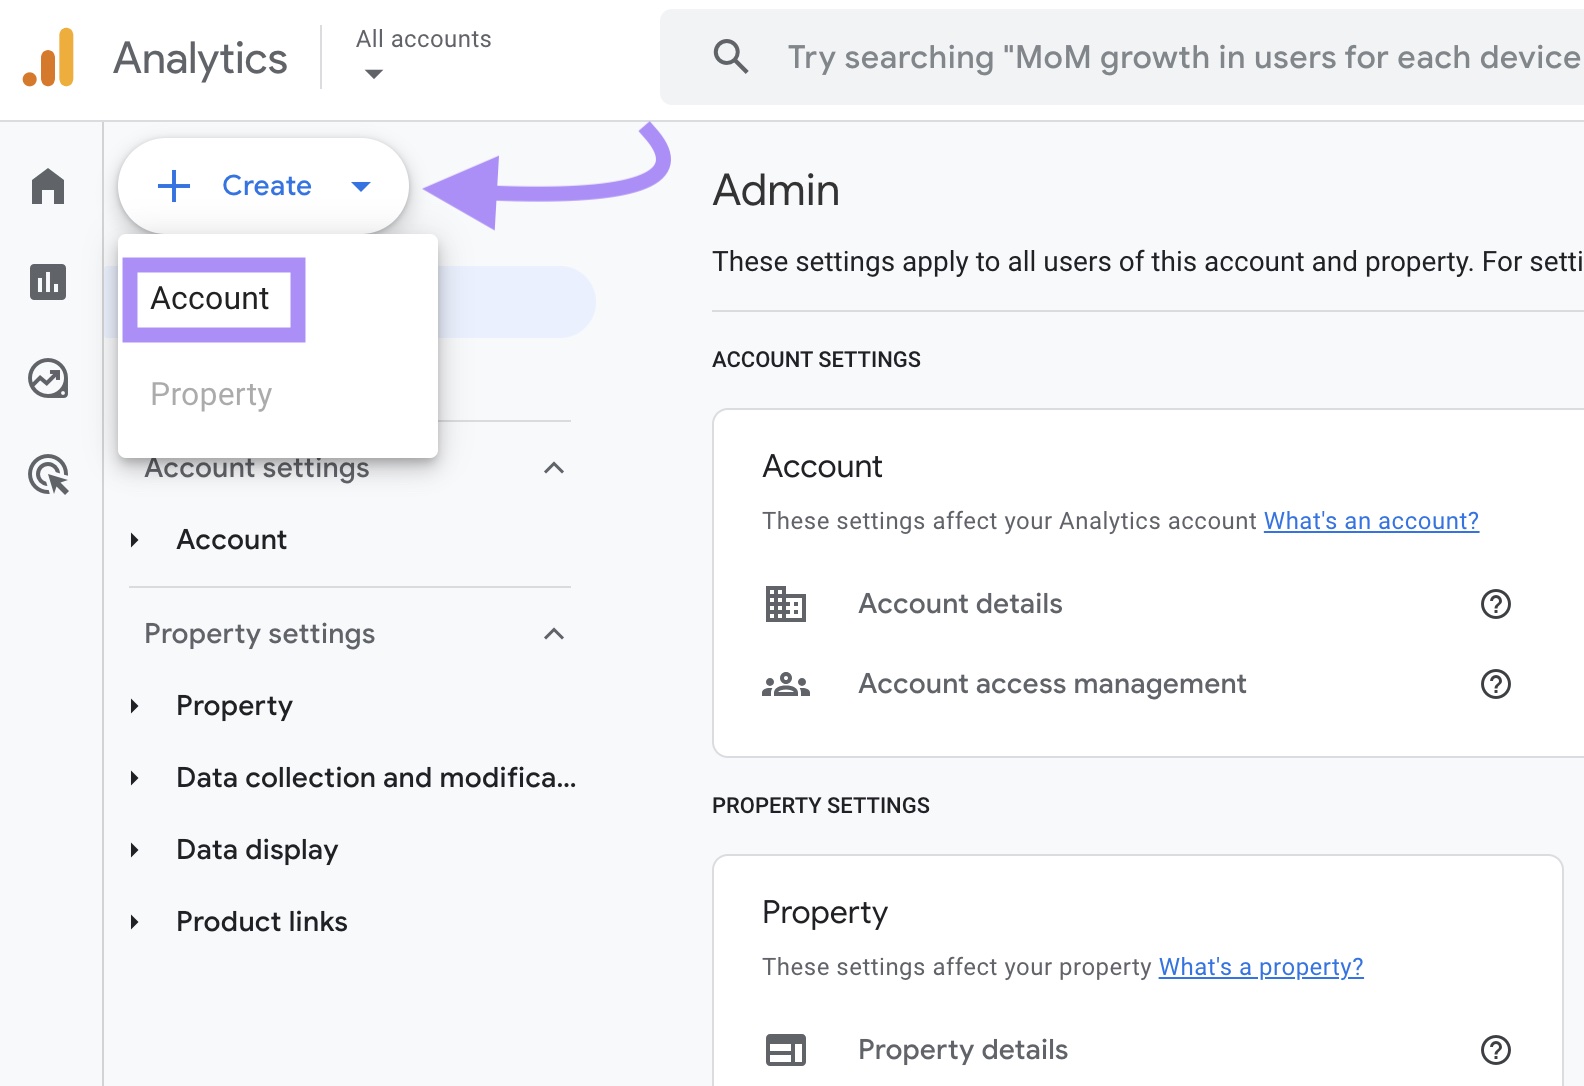 "Create" and "Account" buttons highlighted in Google Analytics